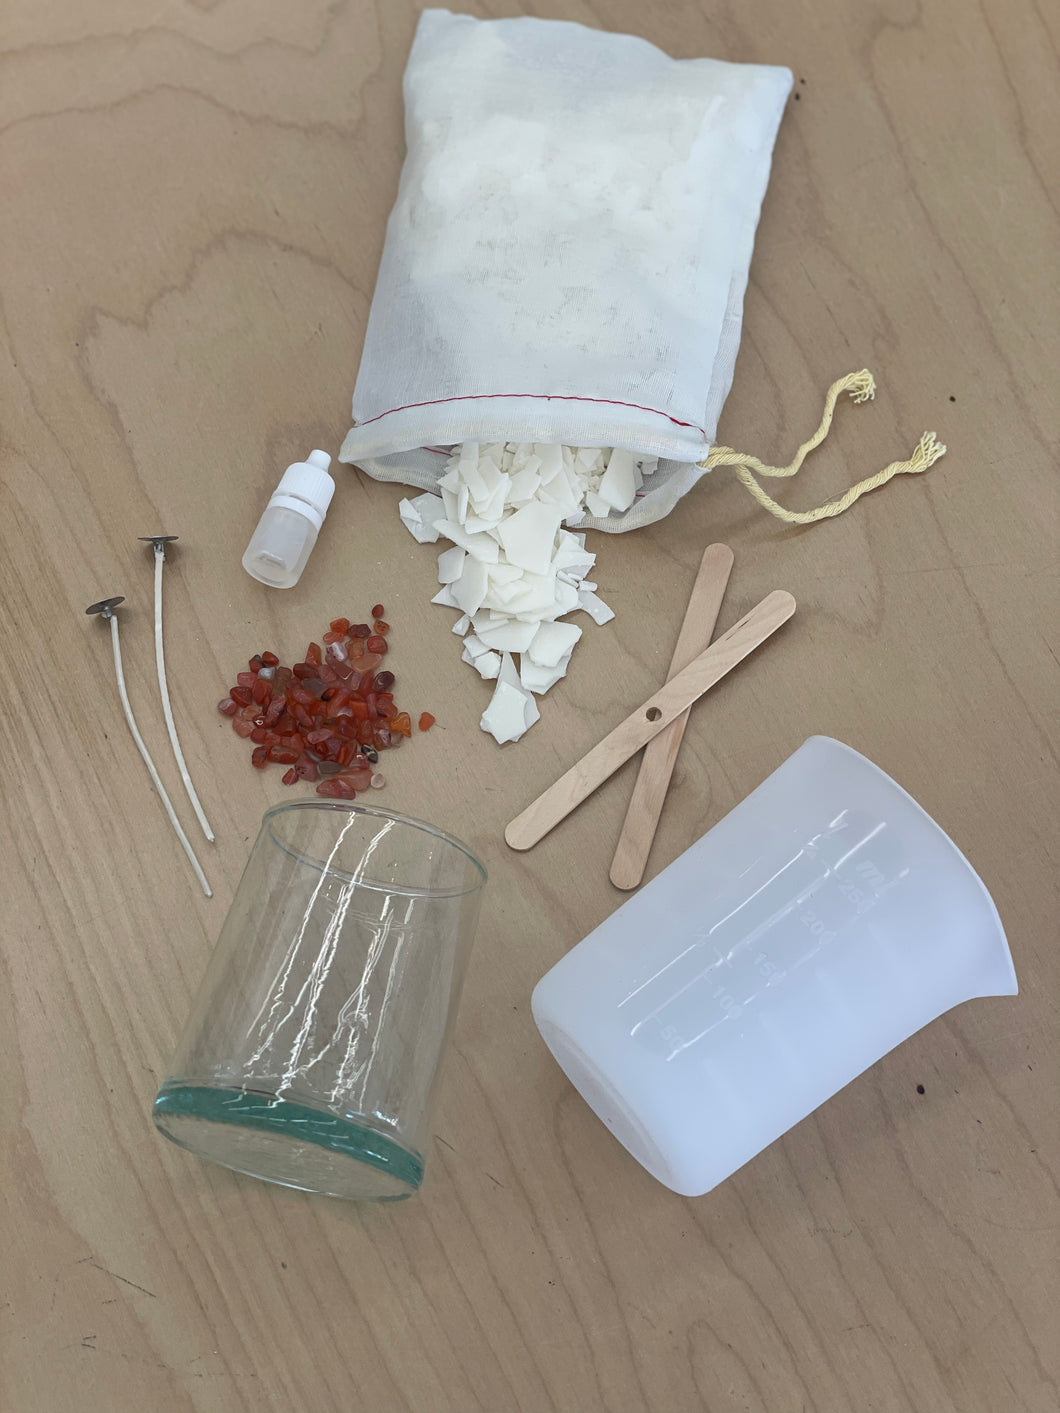 Microwave Intention Candle Making Kit - One Handblown Clear Glass Vessel